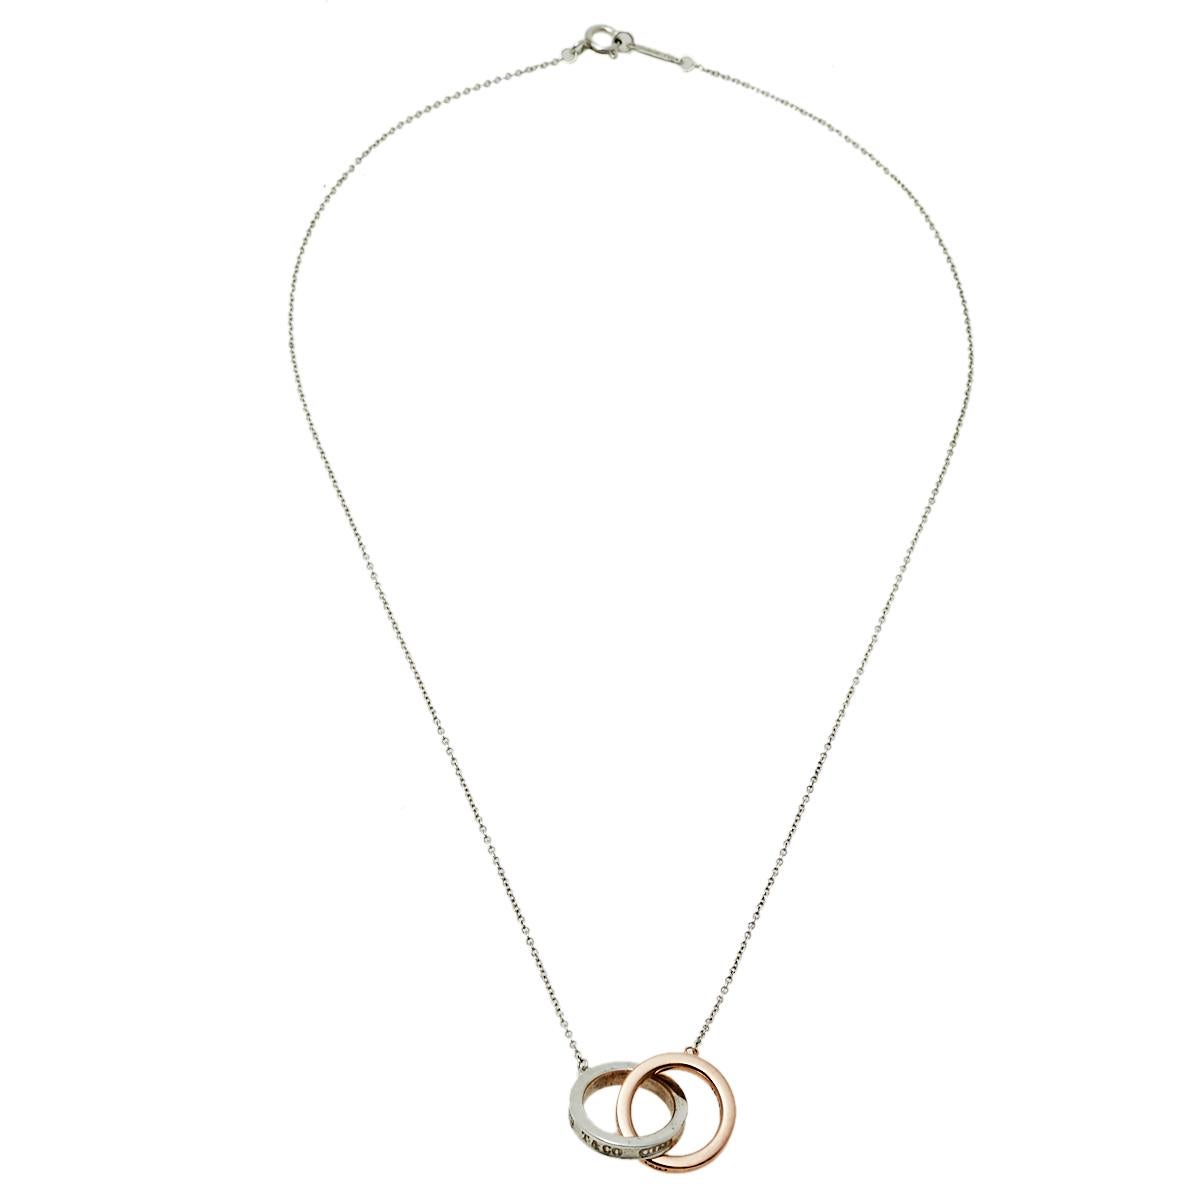 We can't help admiring this beauty from Tiffany & Co.! Beautifully crafted from silver, this necklace is a stunner. It has been gloriously styled with a pendant of interlocking rings, one made from silver and the other from rubedo. The pendant,